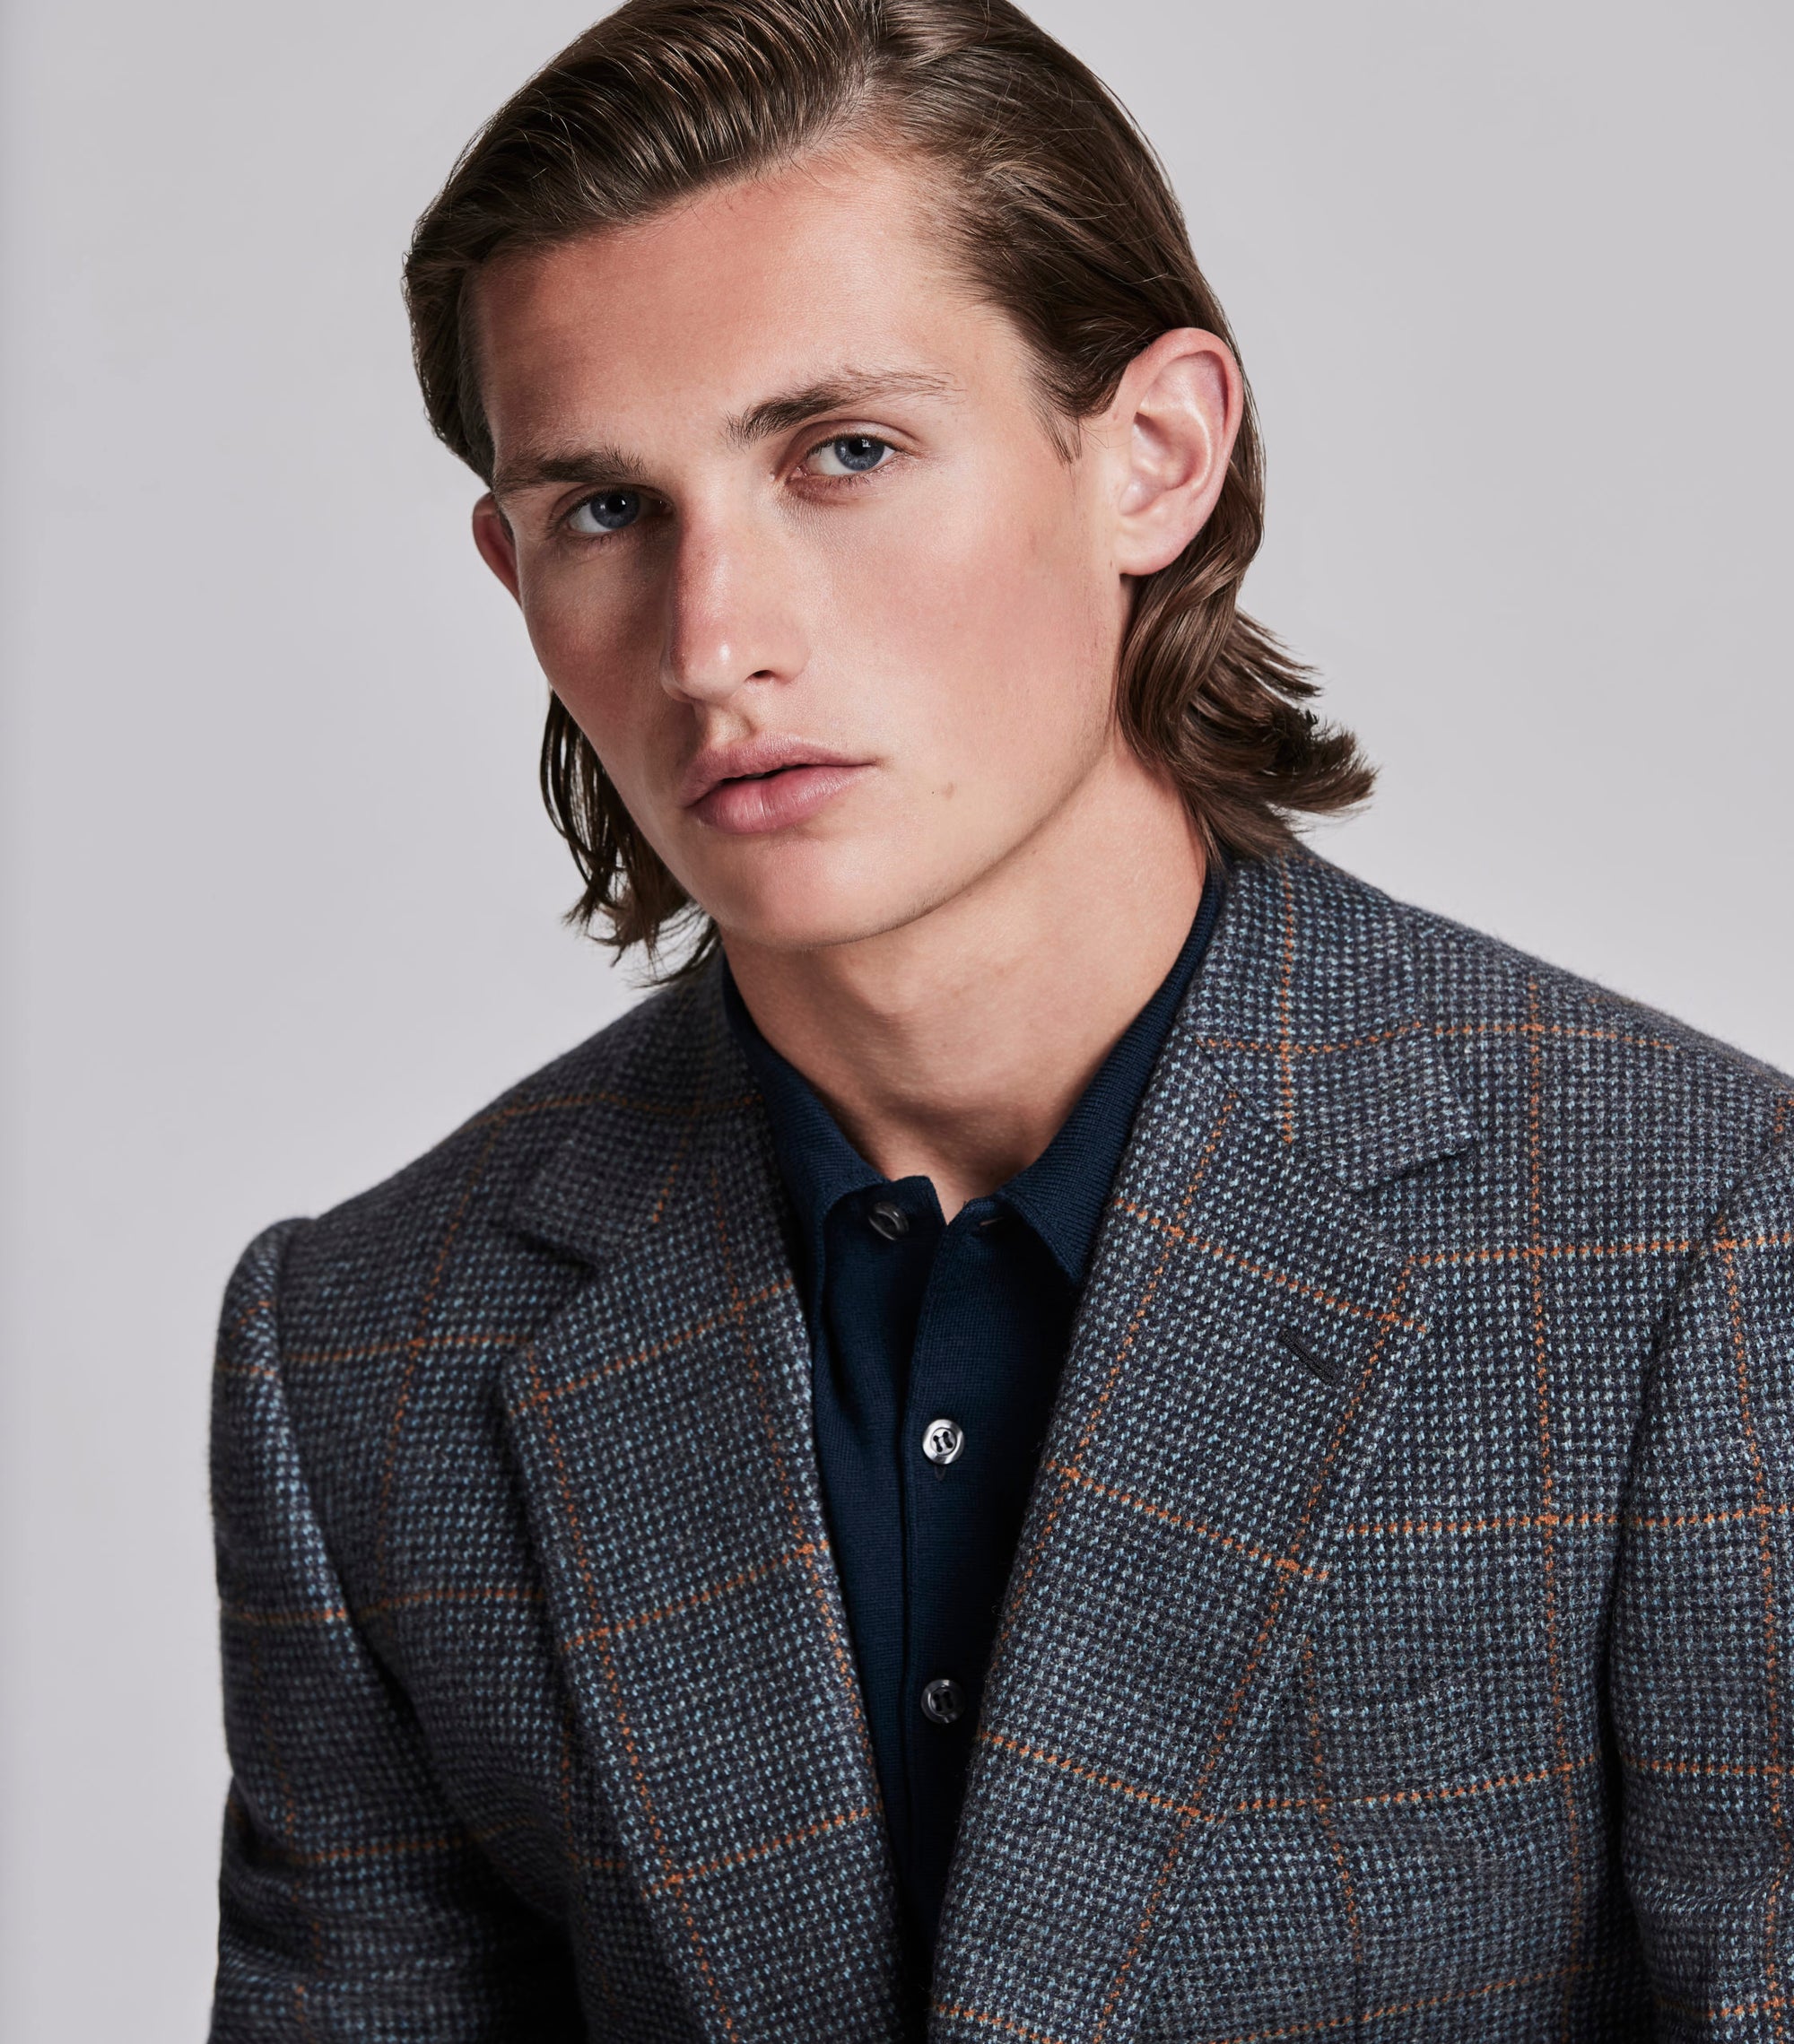 Navy/Rust Hairline Check Cashmere Jacket